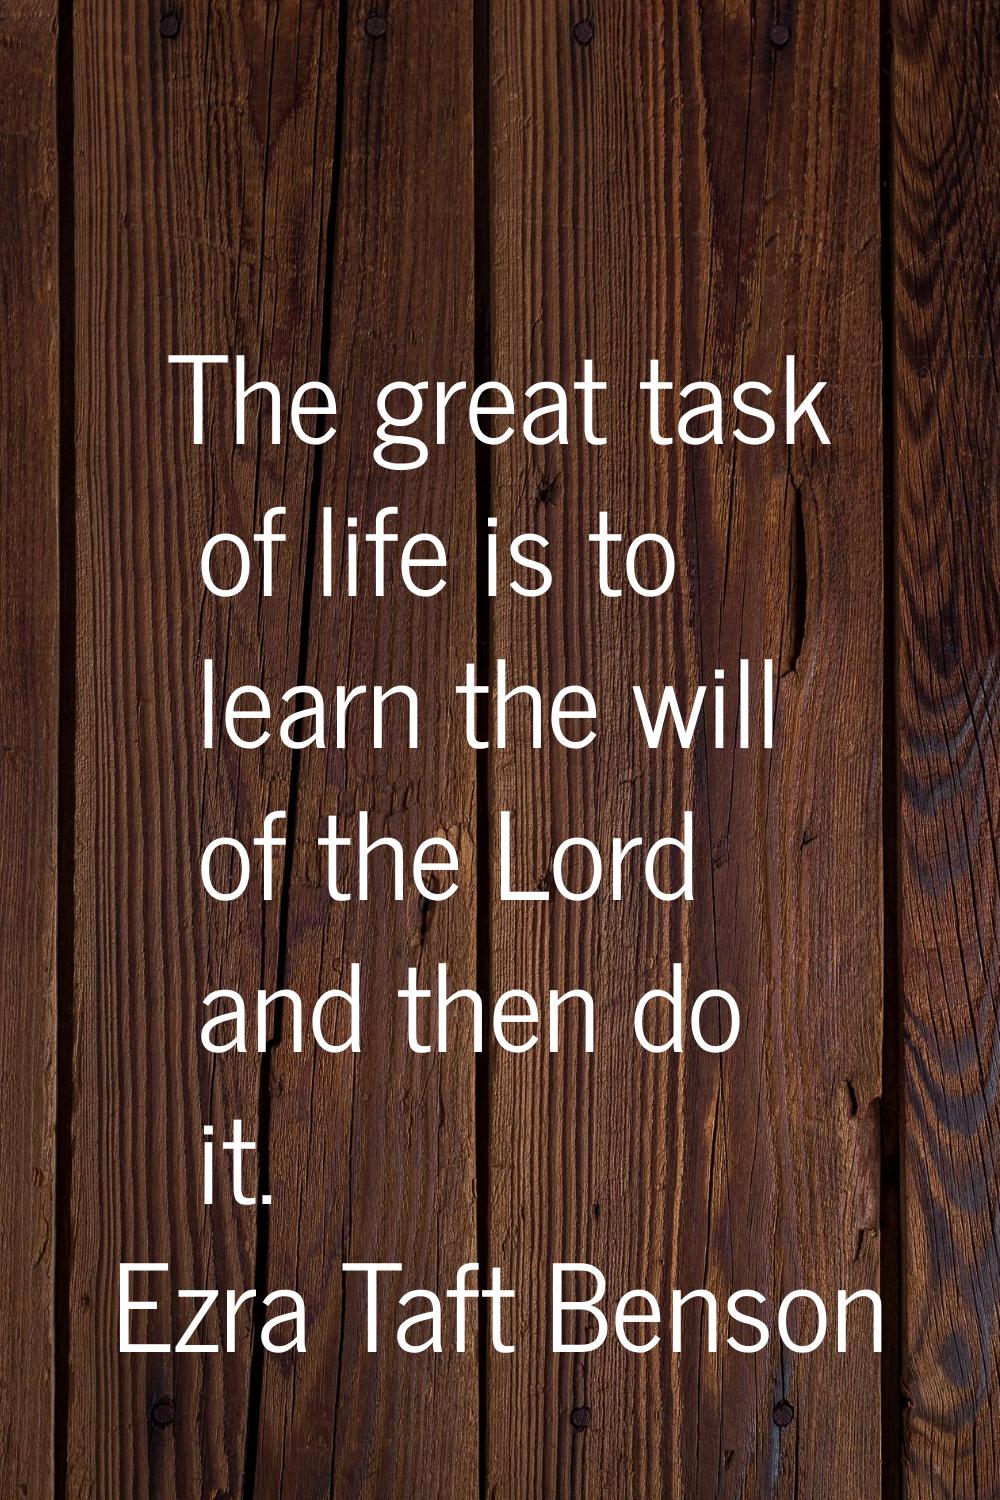 The great task of life is to learn the will of the Lord and then do it.